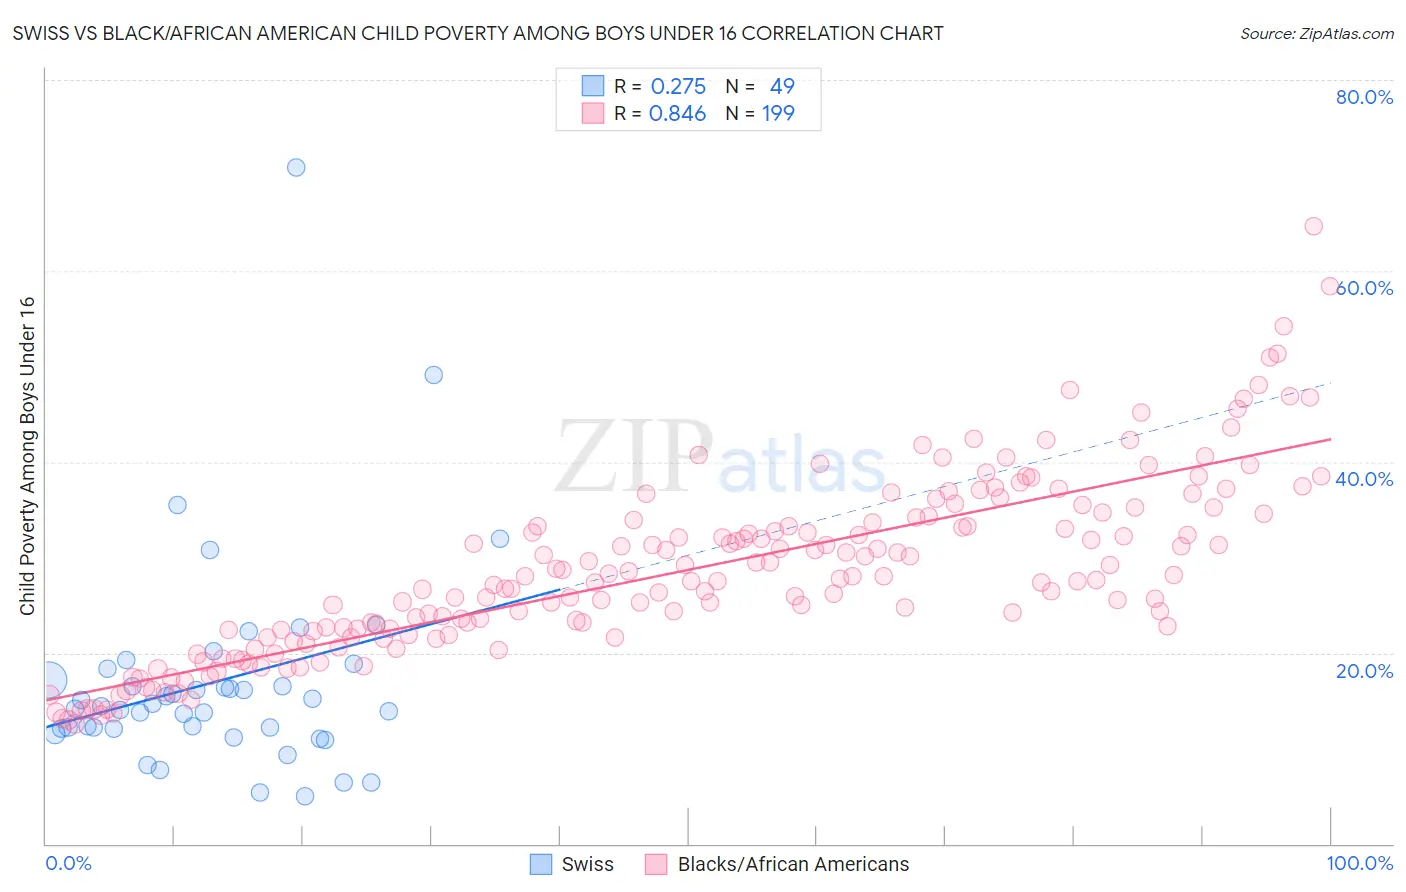 Swiss vs Black/African American Child Poverty Among Boys Under 16